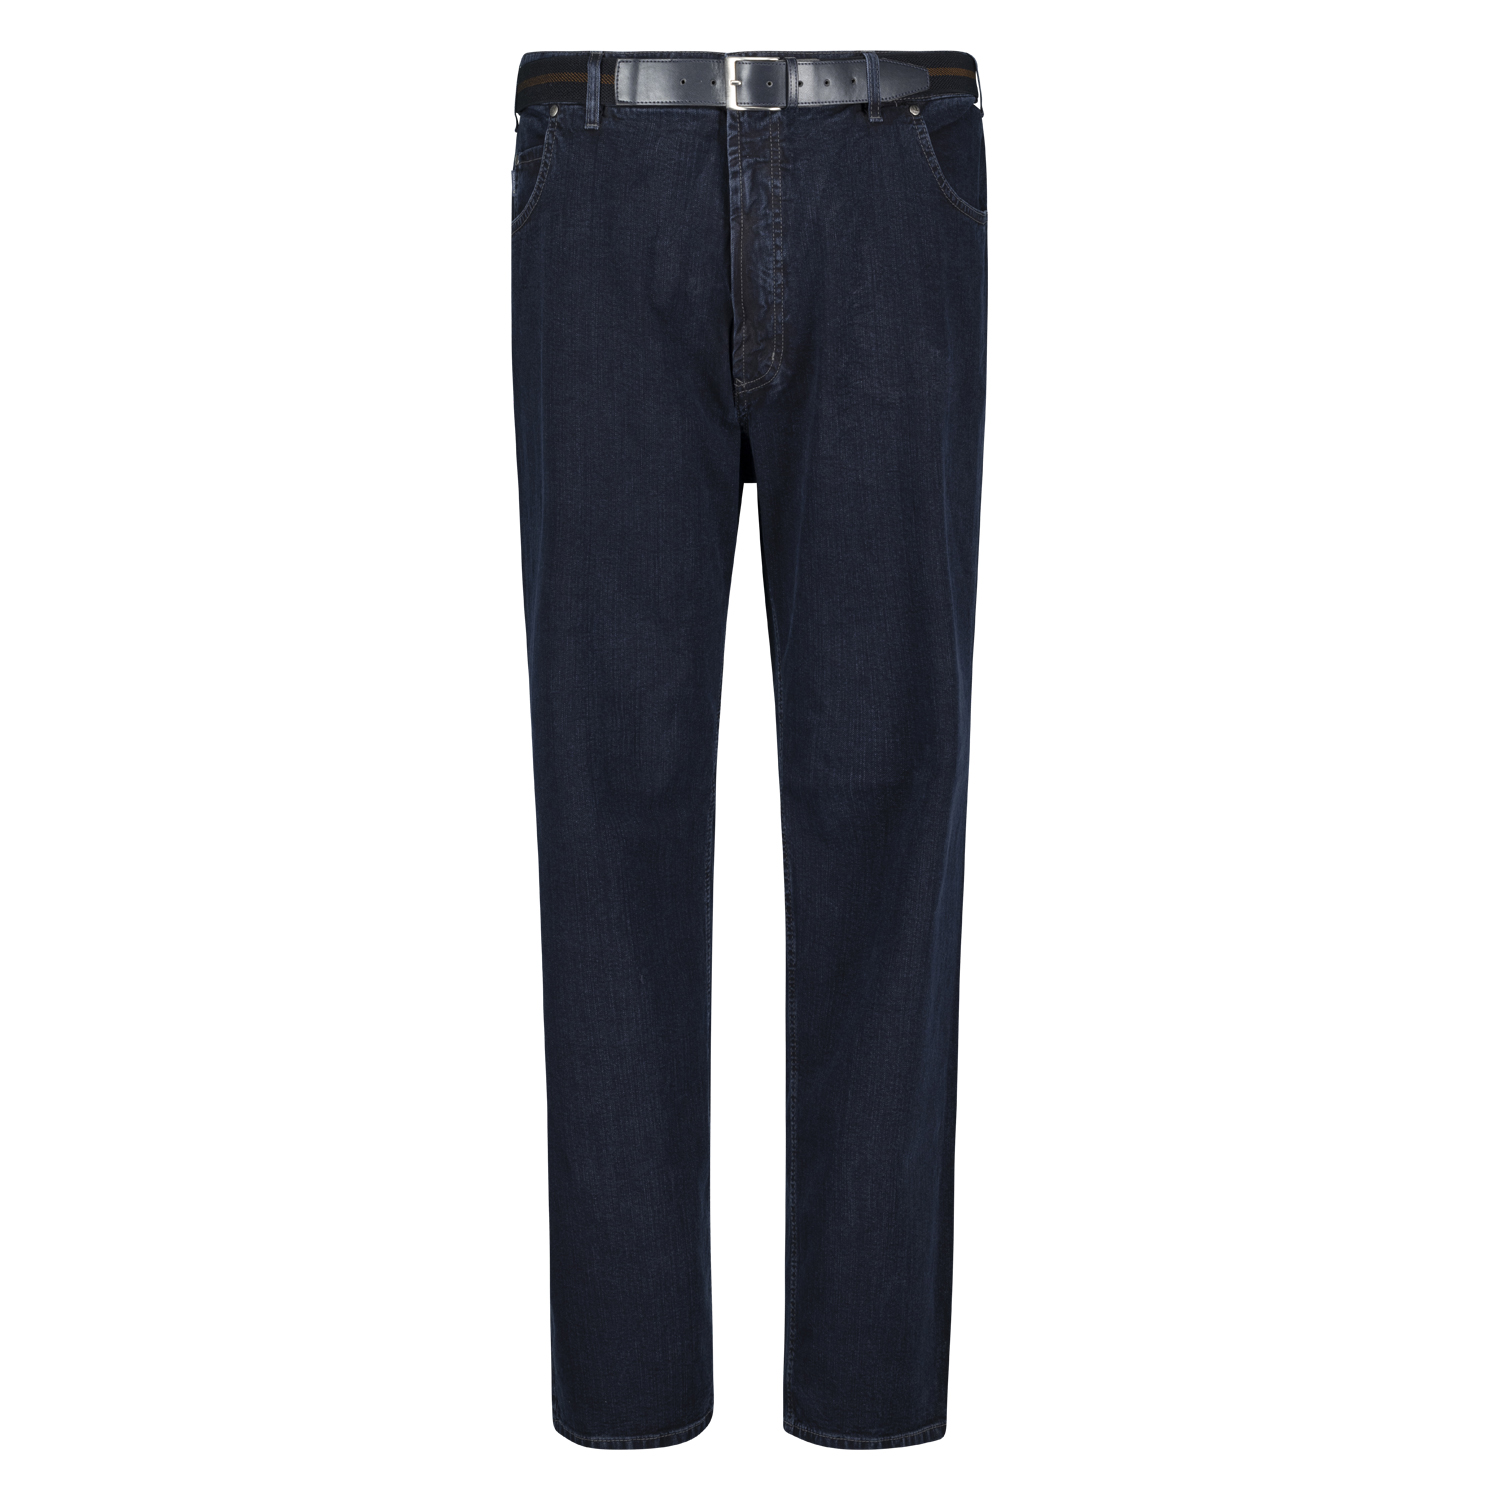 Five pocket jeans model "Peter" by Pioneer in oversize dark blue (high rise): 59 - 85